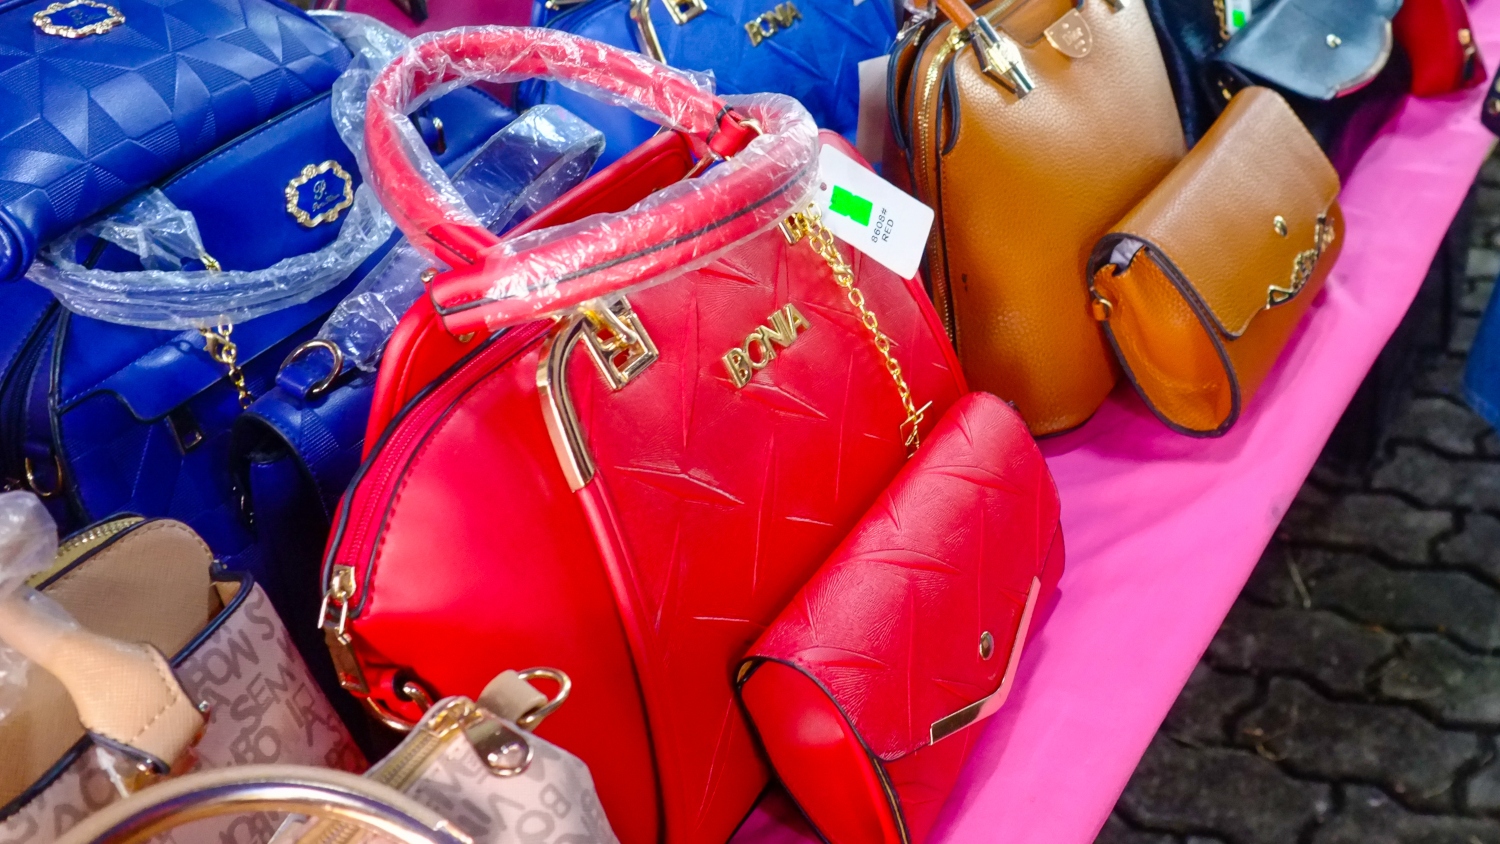 Global counterfeiting costs luxury brands billions of dollars